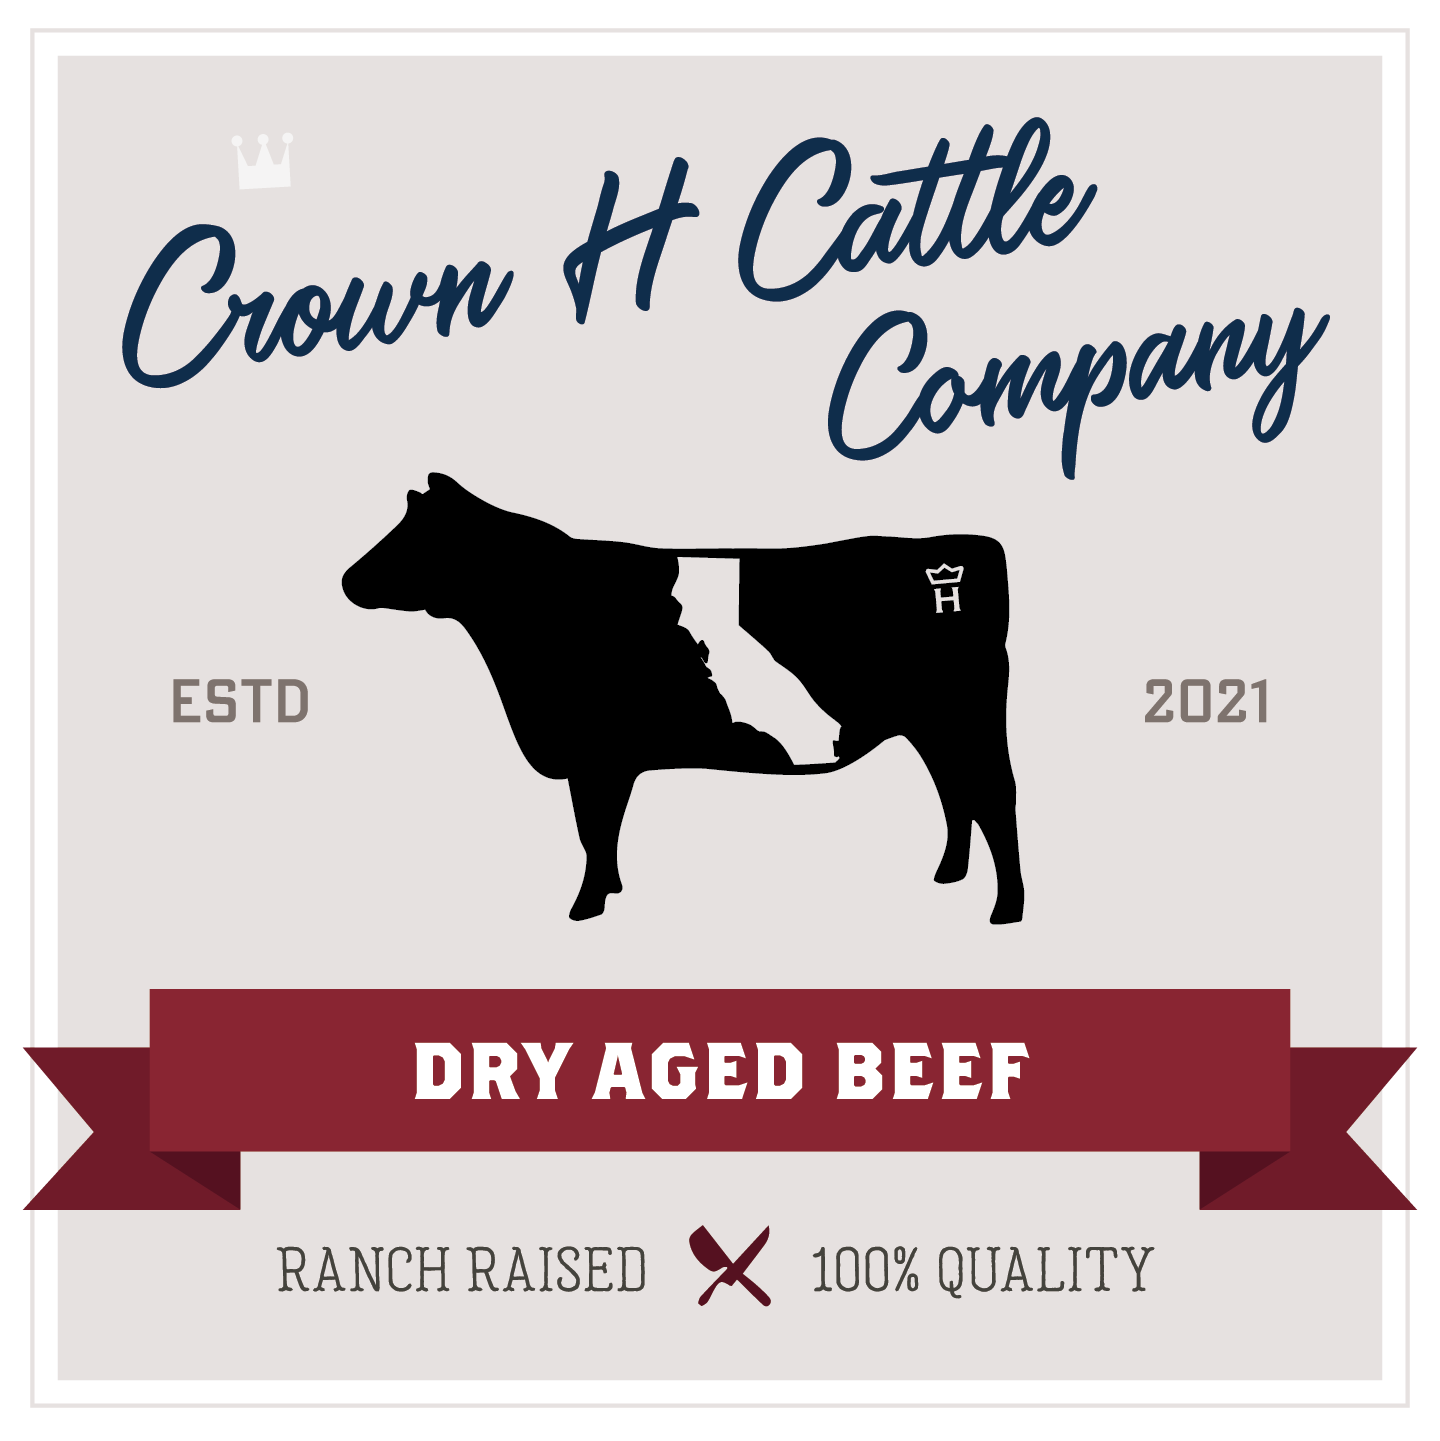 Gift Certificate for Crown H Cattle Company $50 - $400